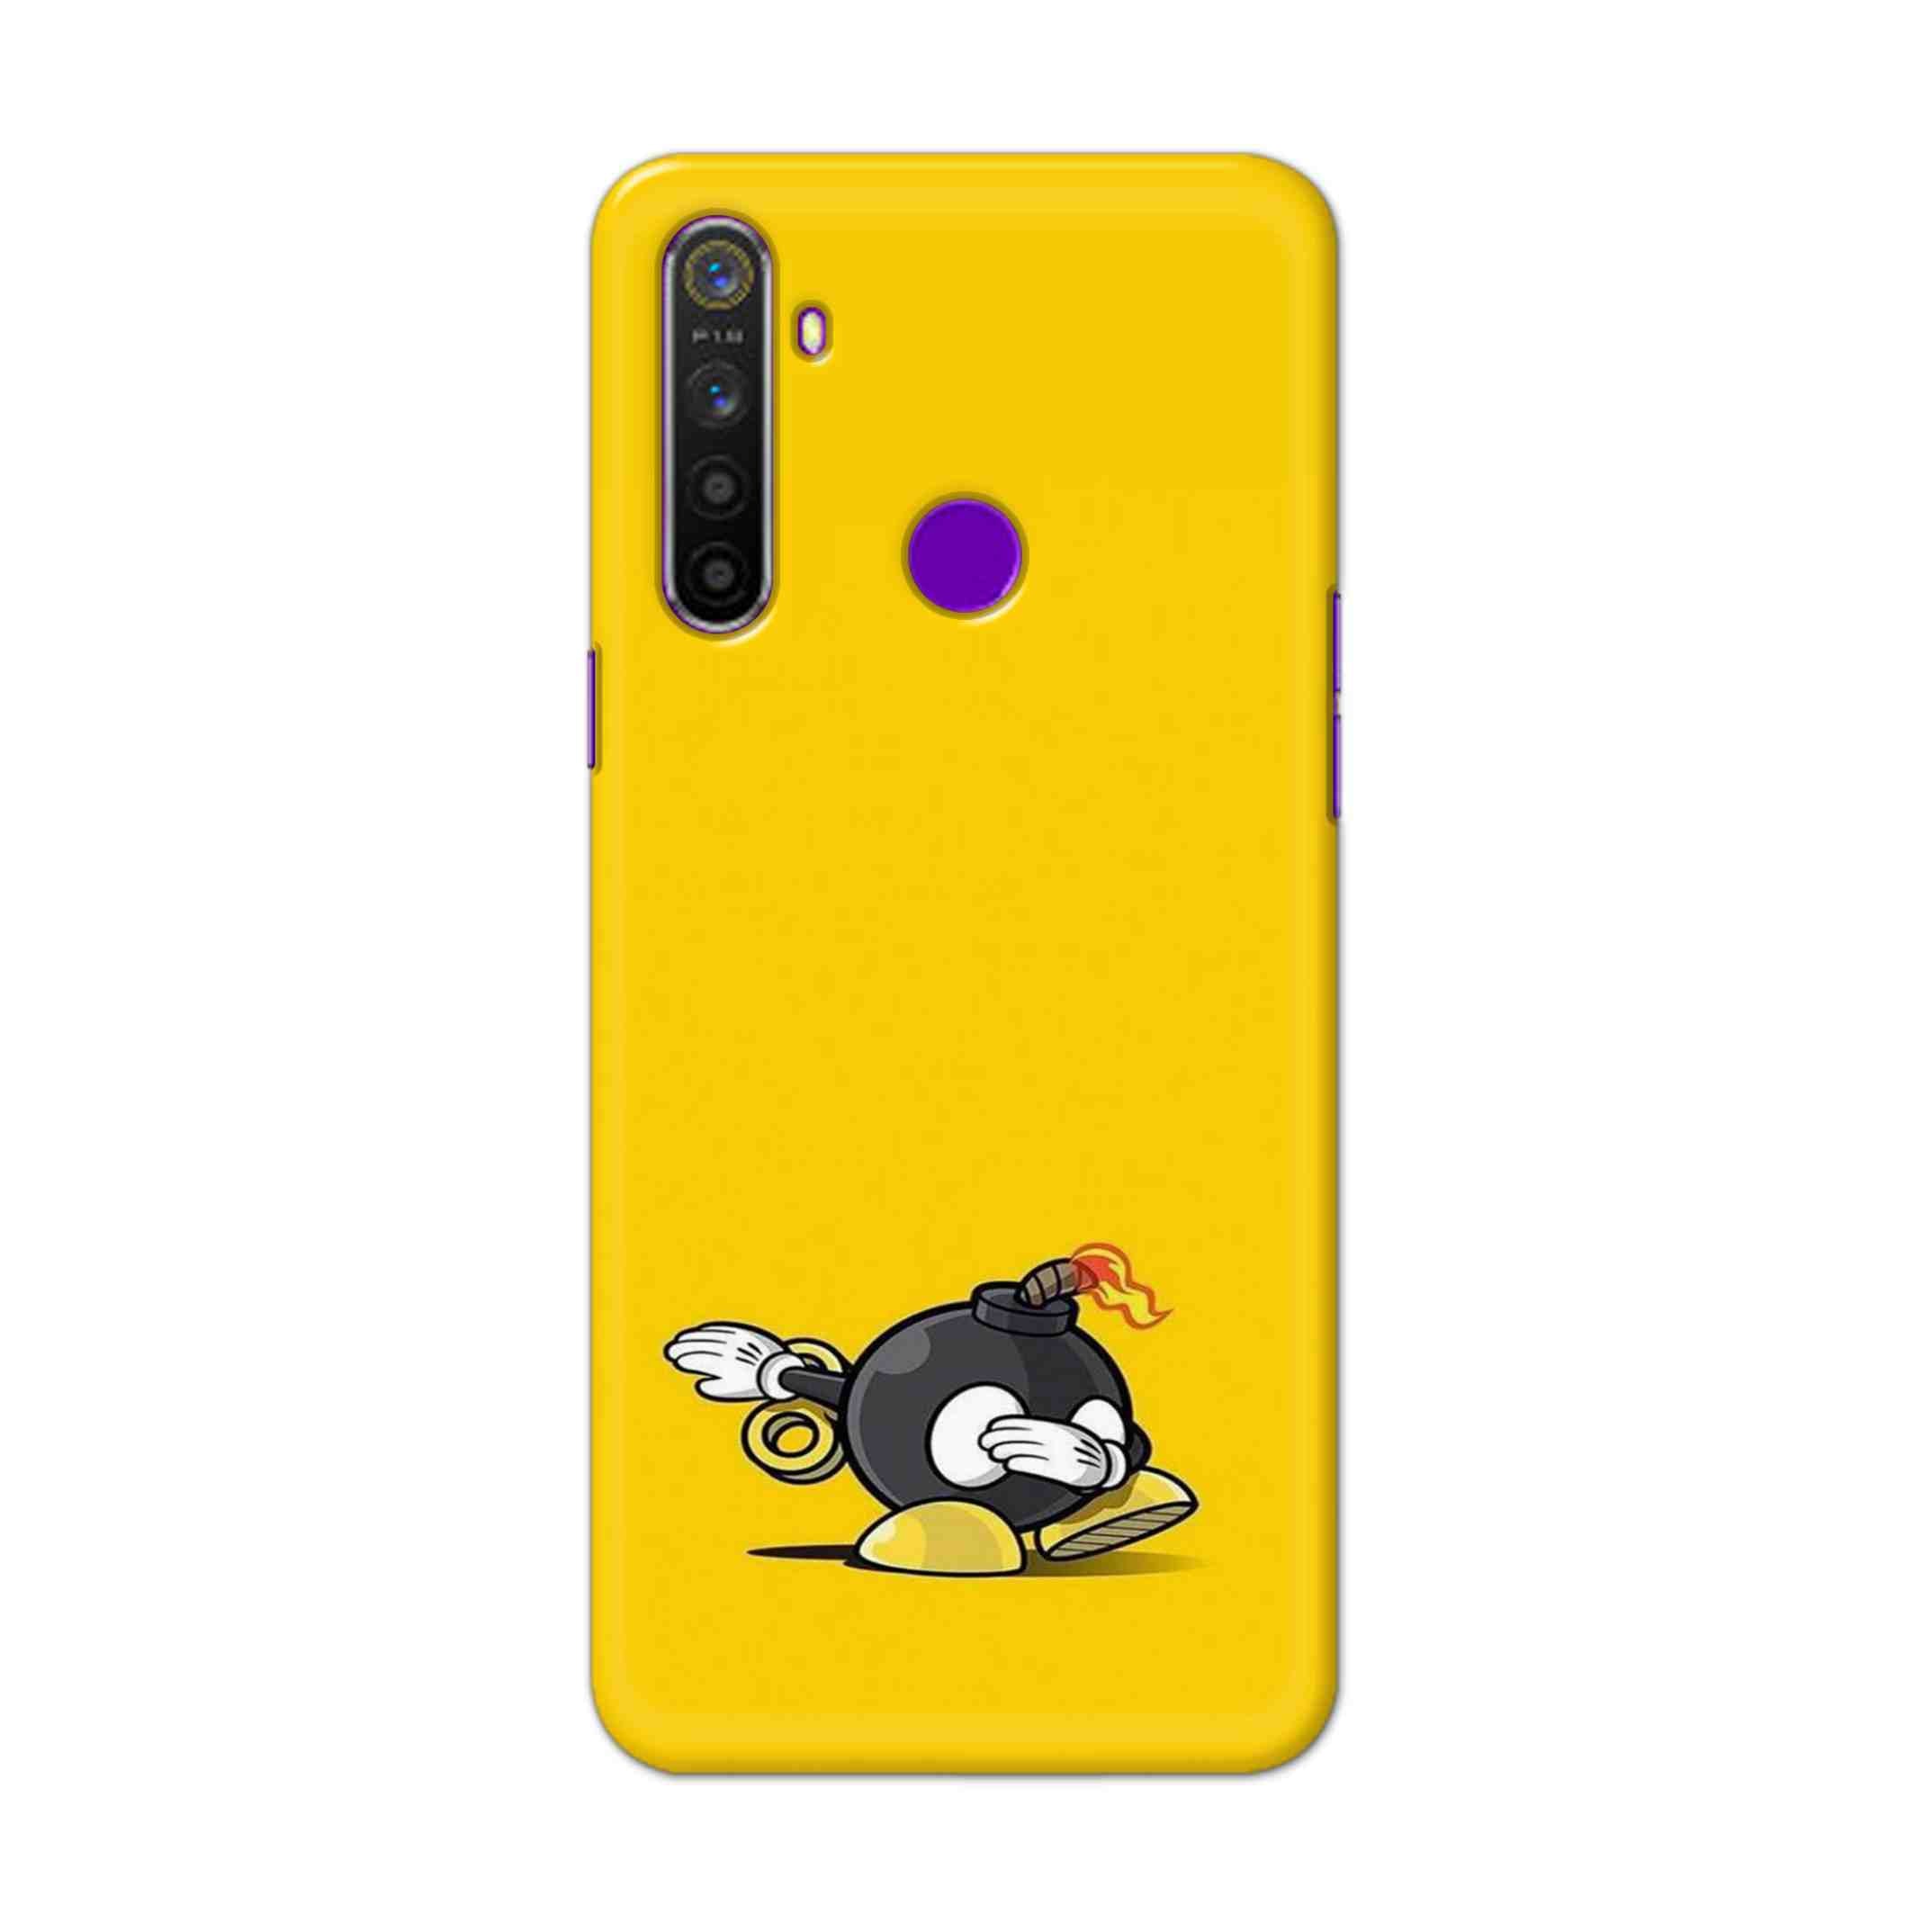 Buy Dashing Bomb Hard Back Mobile Phone Case Cover For Realme 5 Online